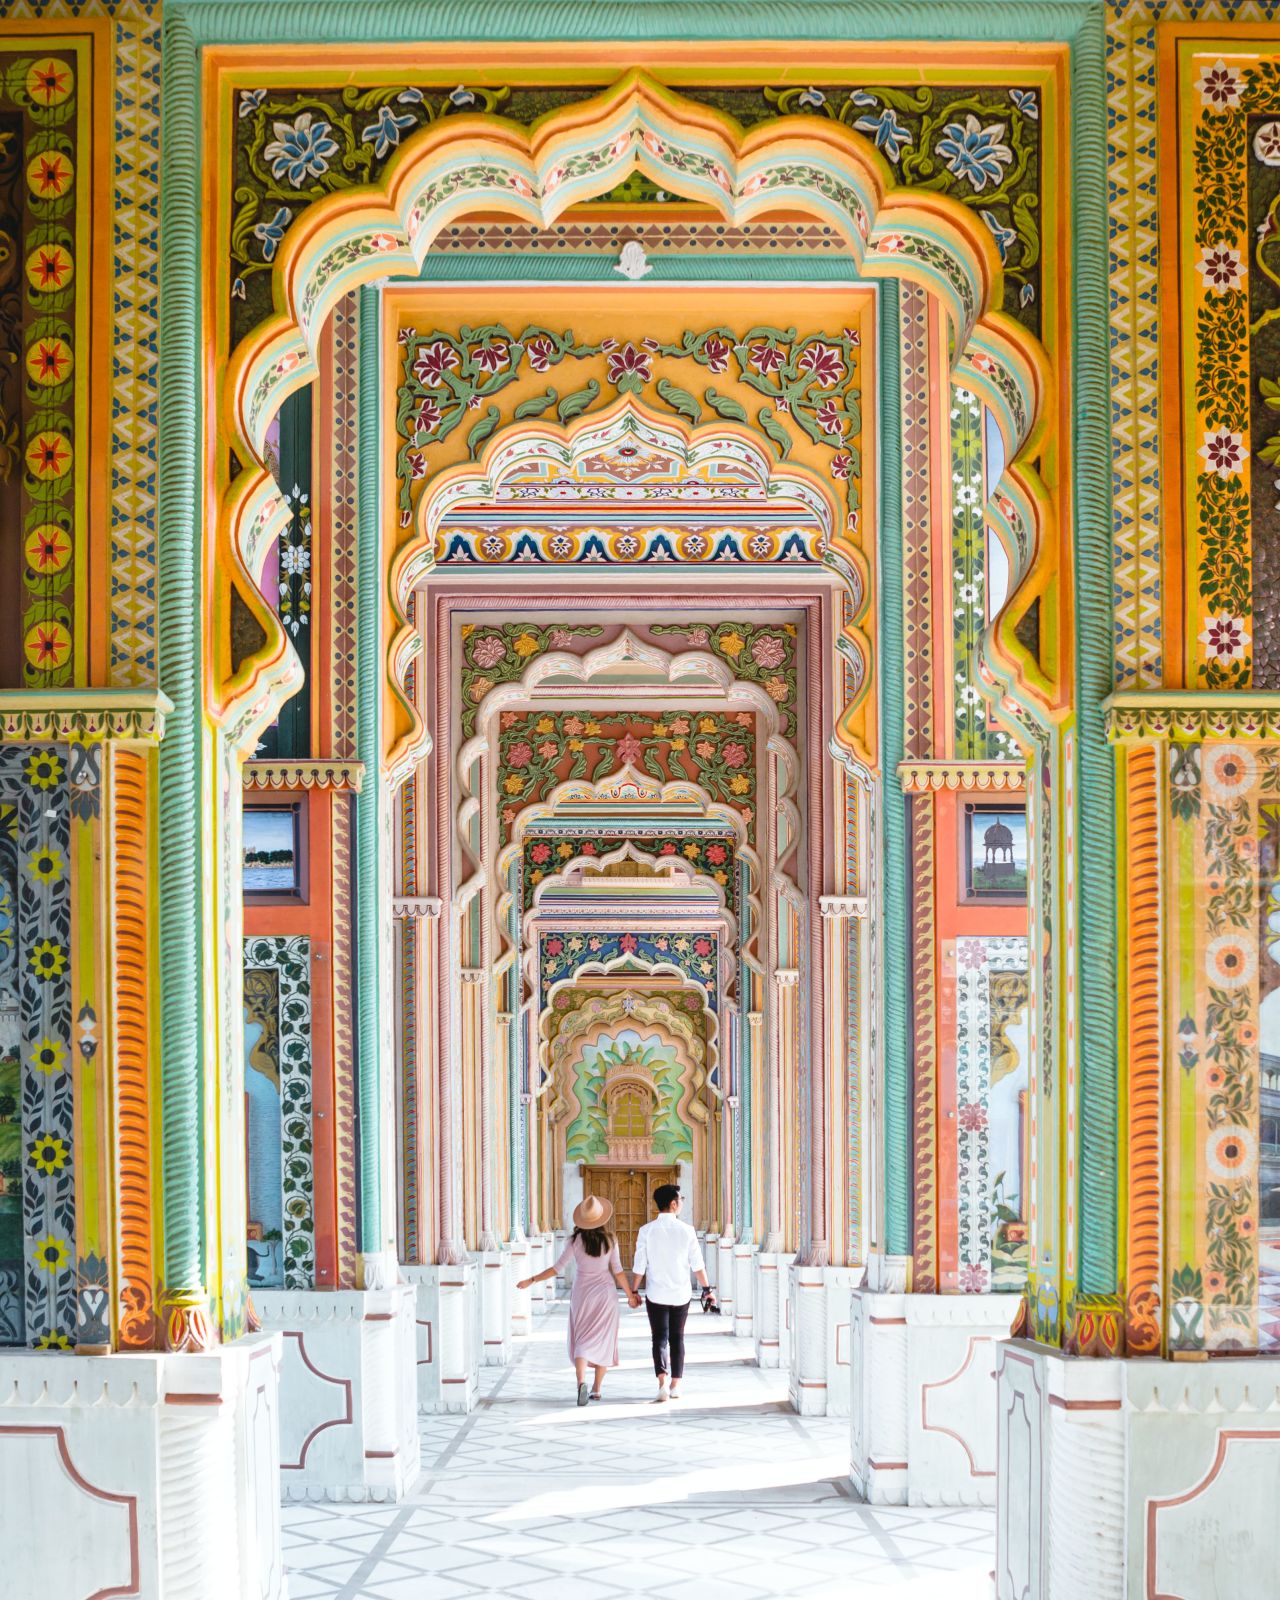 Buildings in Jaipur are made in a Rajasthani architecture style which combines Rajput and Mughal design techniques.